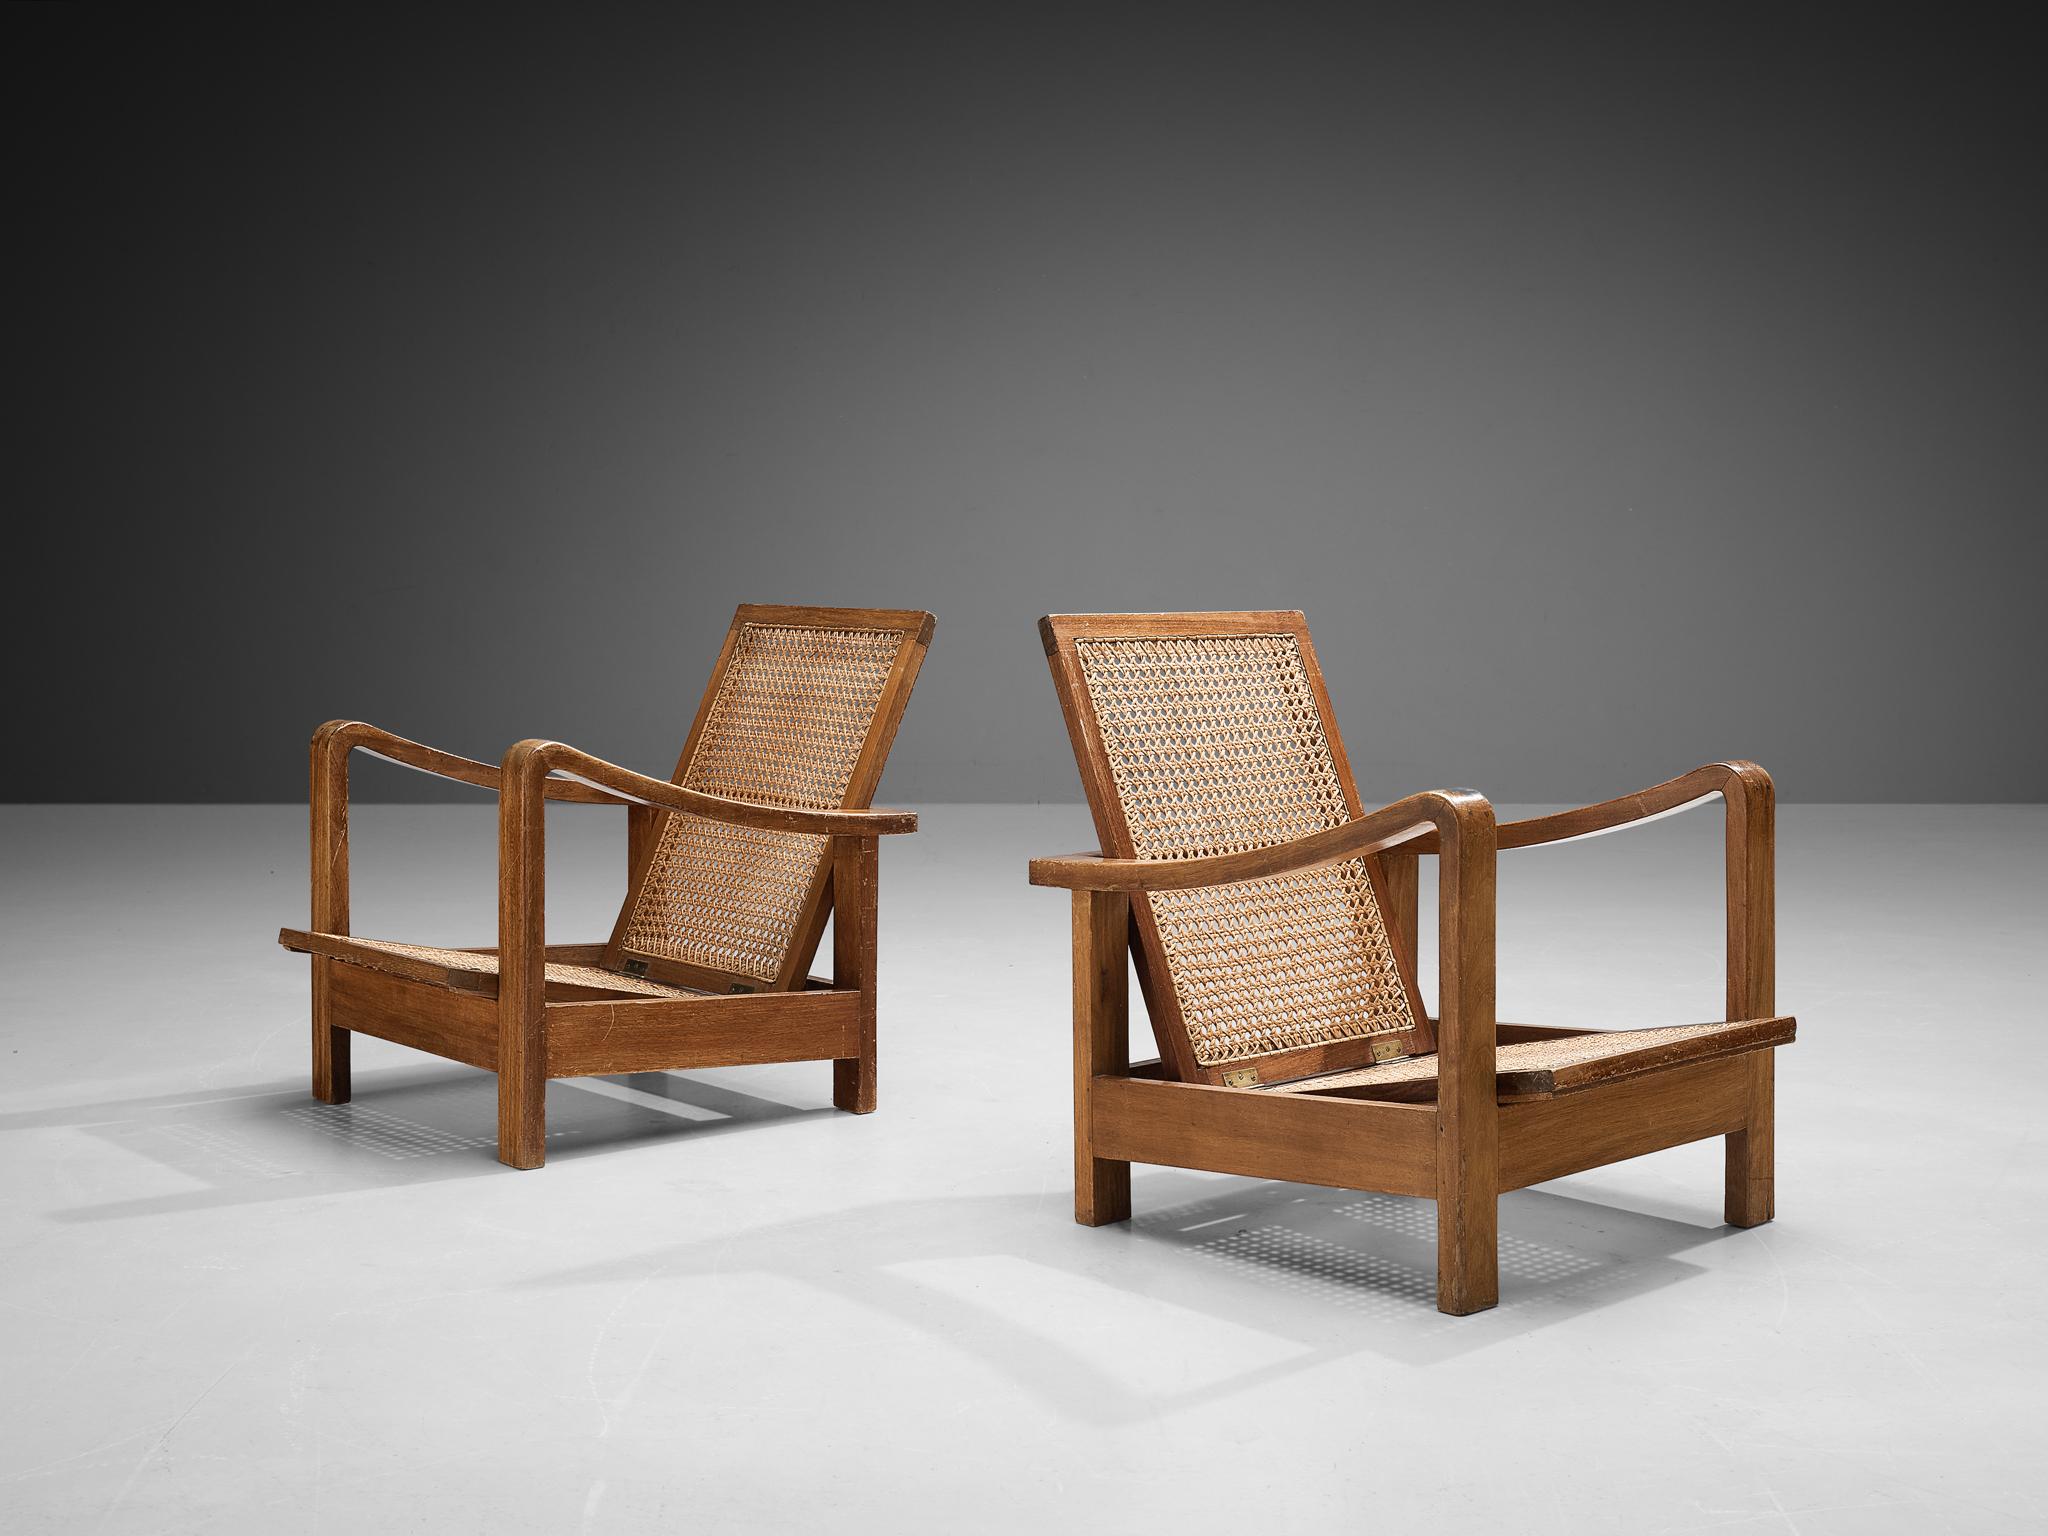 Pair of lounge chairs, oak, cane, France, 1940s/1950s.

A truly lovely pair of armchairs in a natural oak. The seats and backrests are made of cane. The seating part has a sliding mechanism in the frame and can be adjusted for comfort when in use,